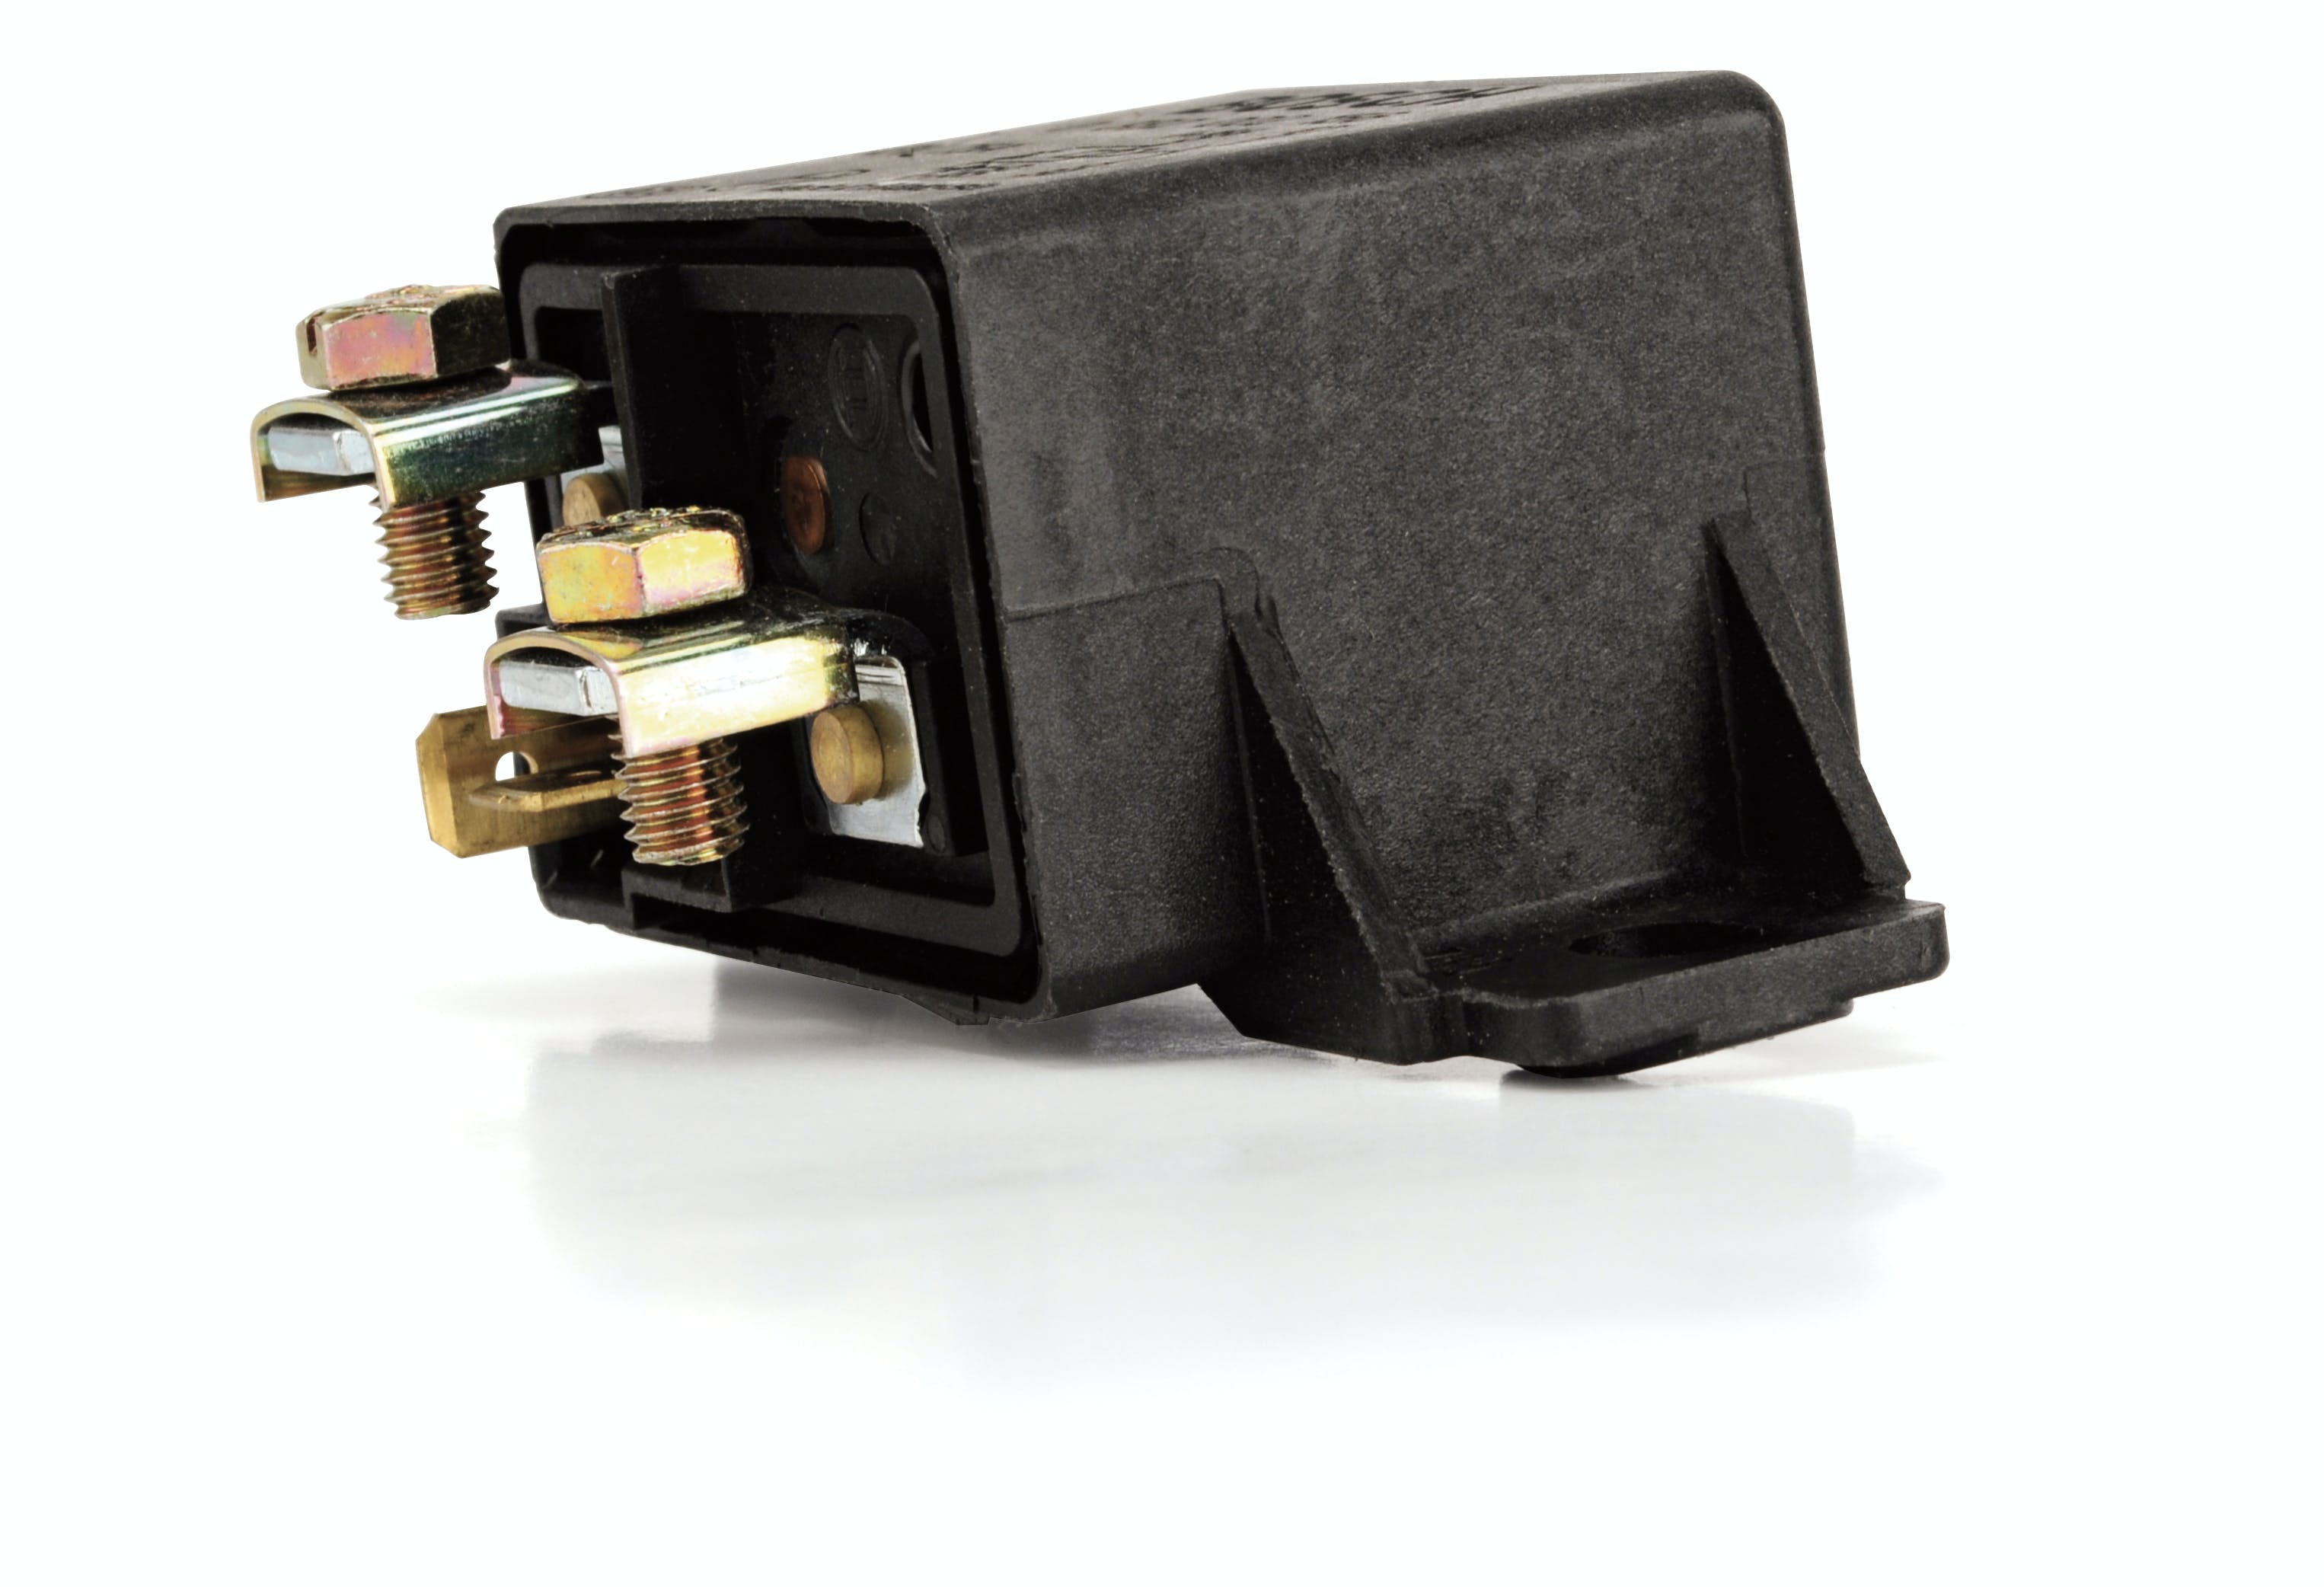 FAST - Fuel Air Spark Technology 307019 Relay, Fast 75 Amp